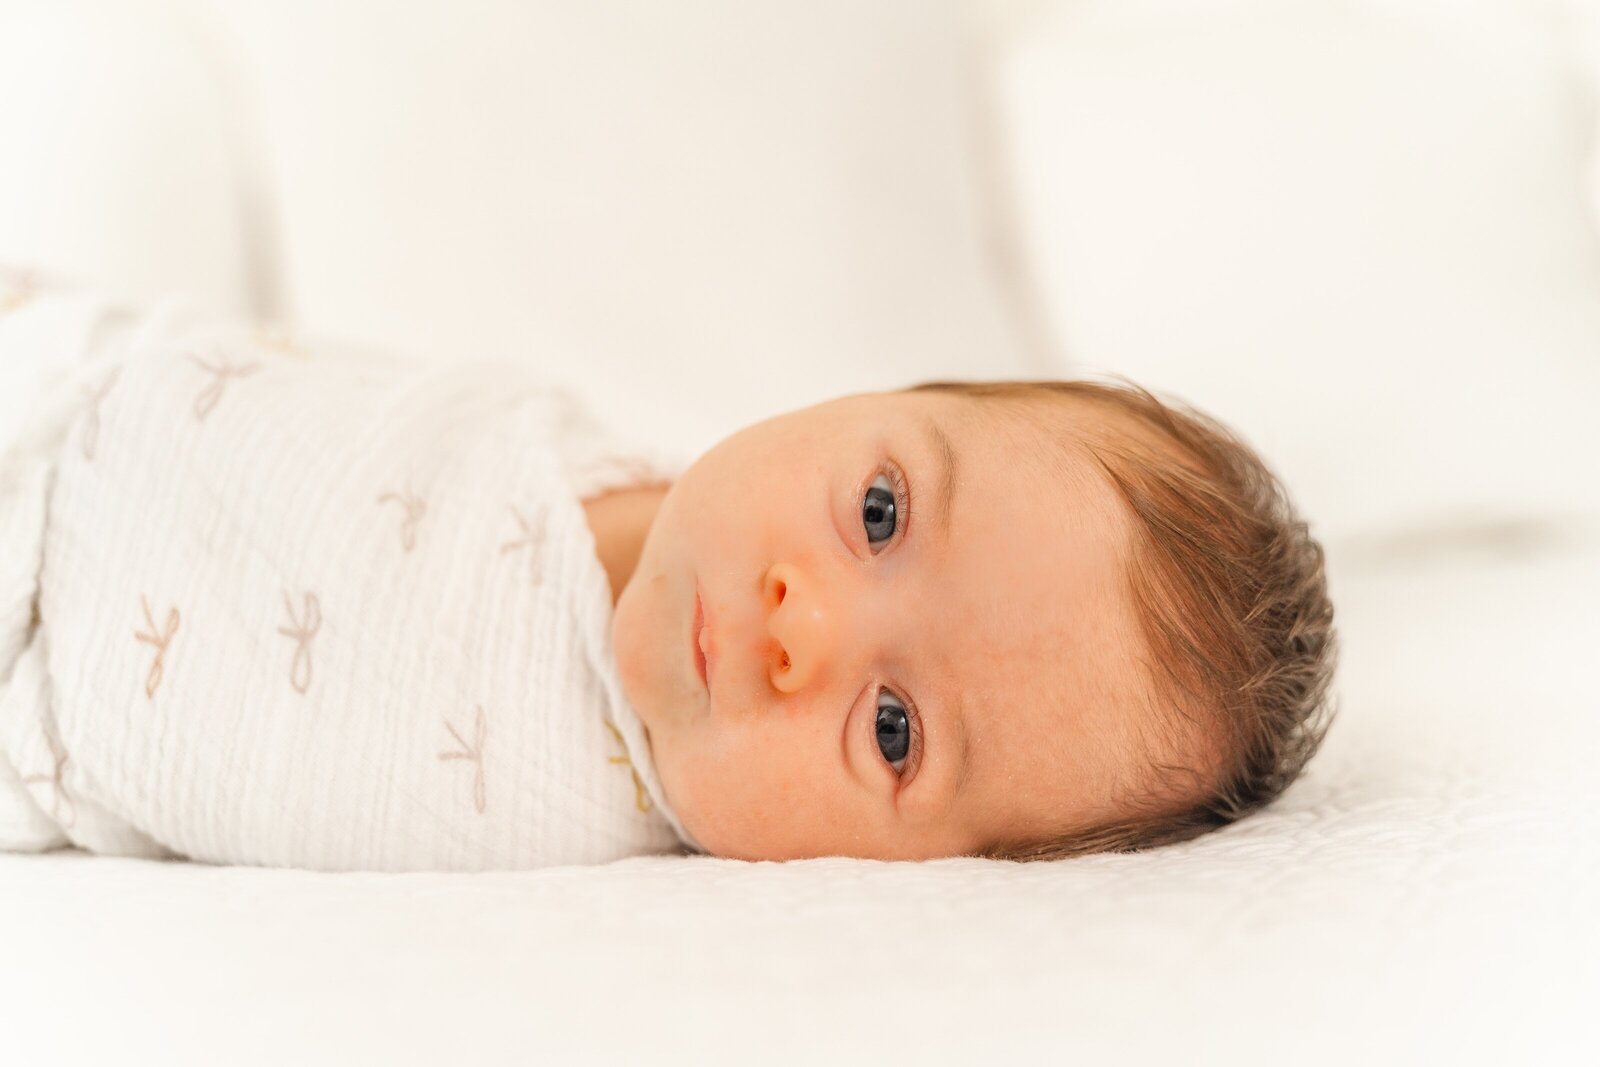 Chattanooga newborn photography portrait of baby's face calmly swaddled on bed.